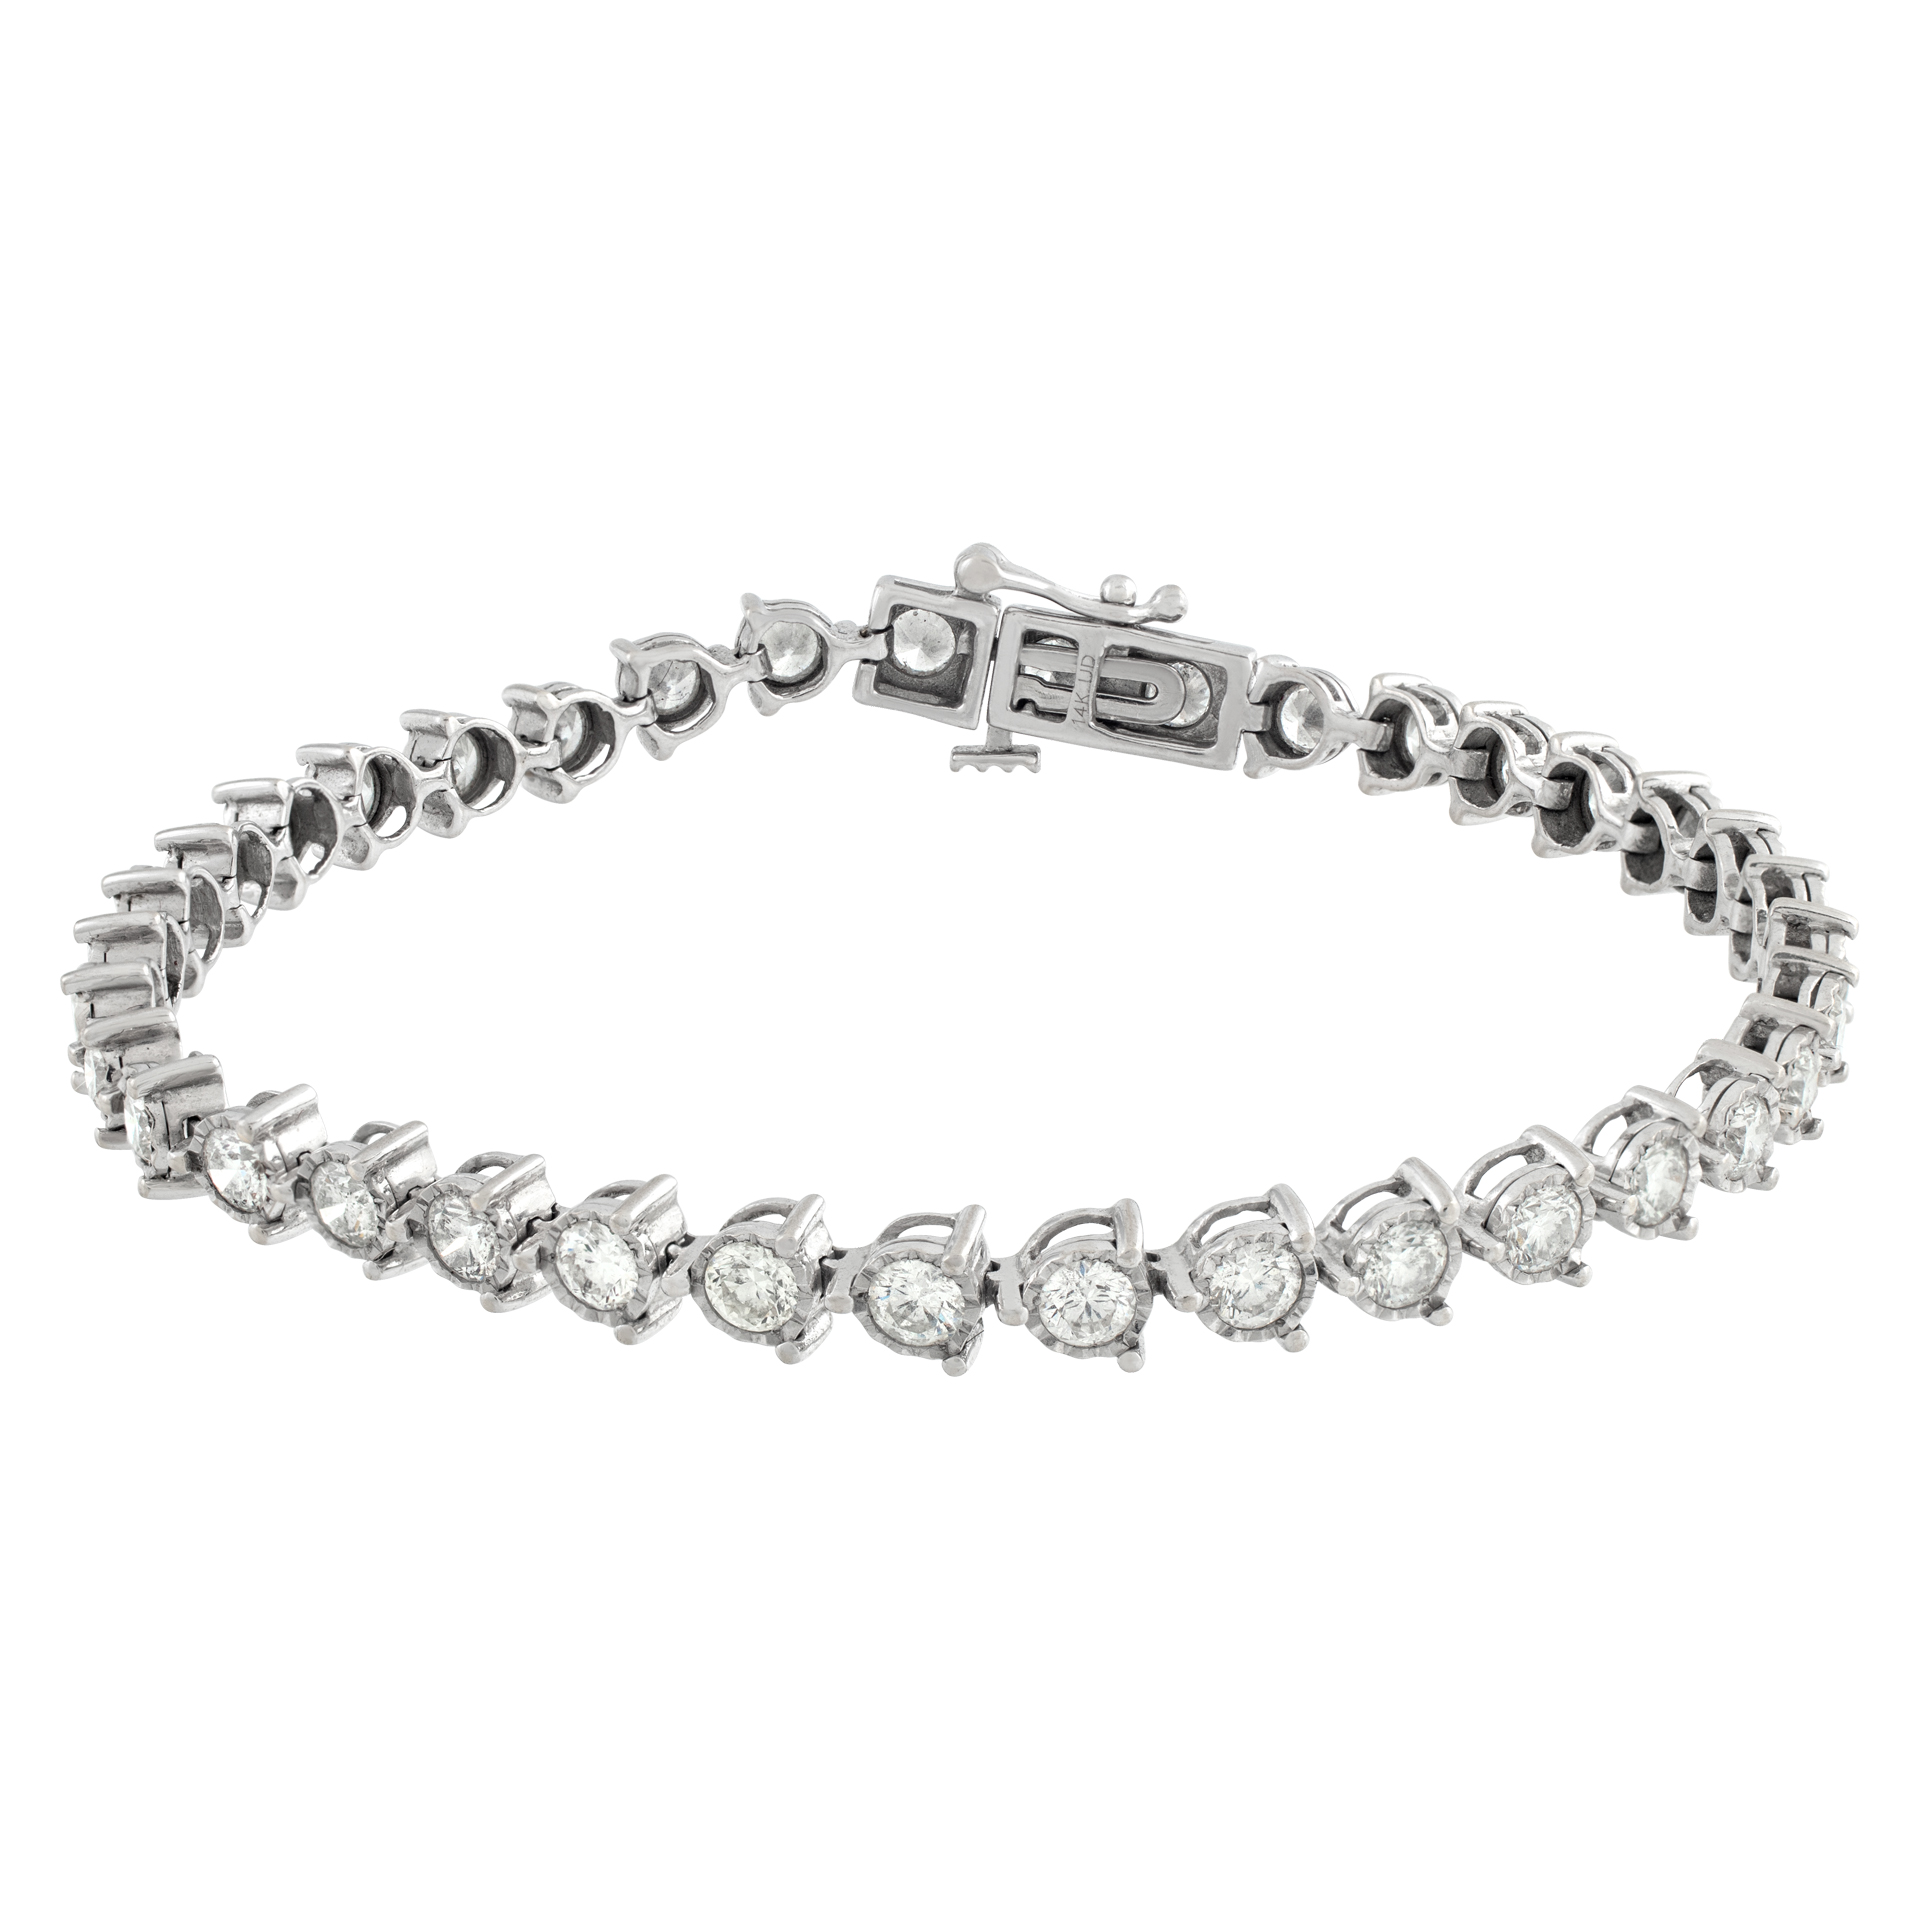 Line diamonds bracelet set in 14K white gold. Round brilliant diamonds total approx. weight: 3.70 carats